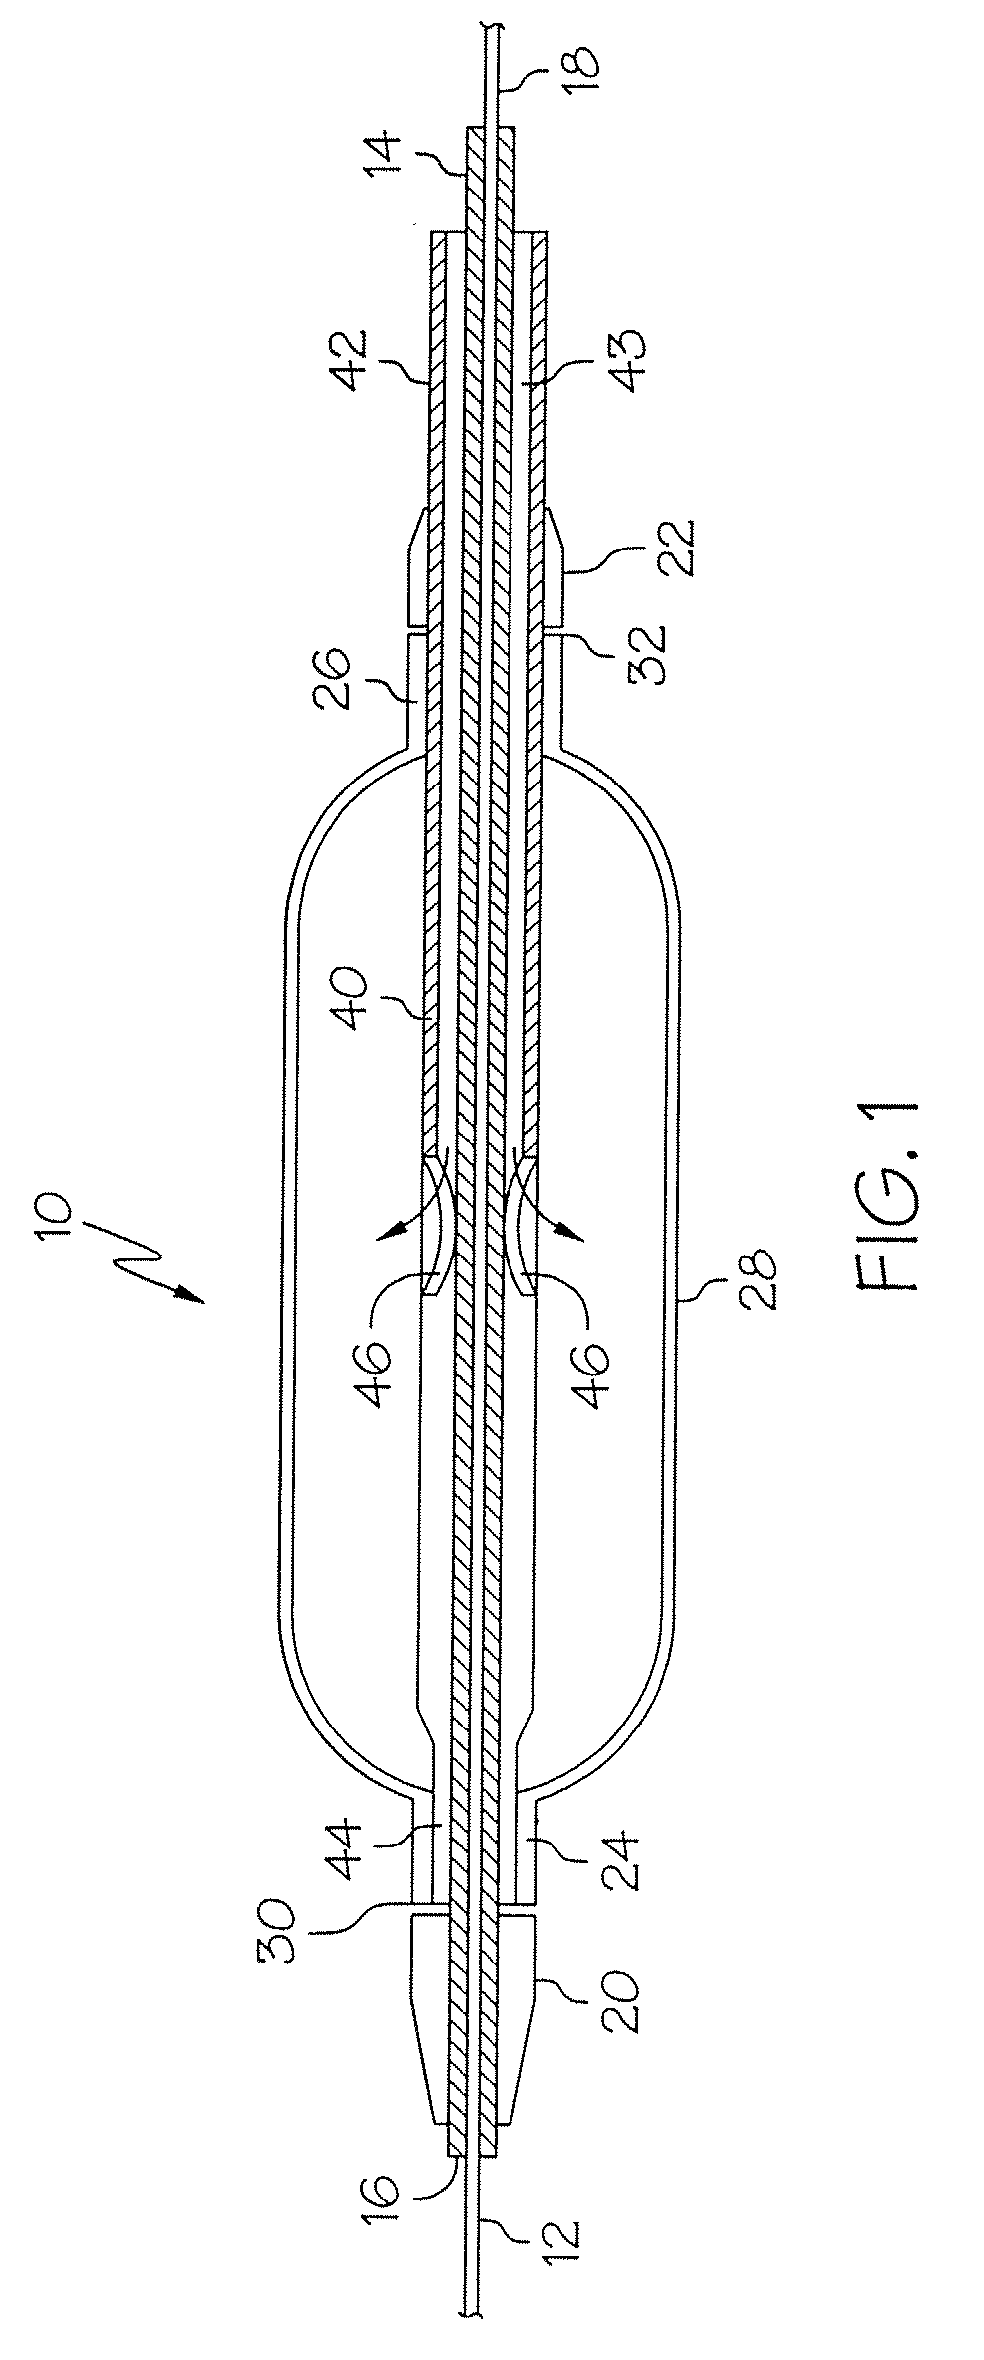 Rotating stent system for side branch access and protection and method of using same